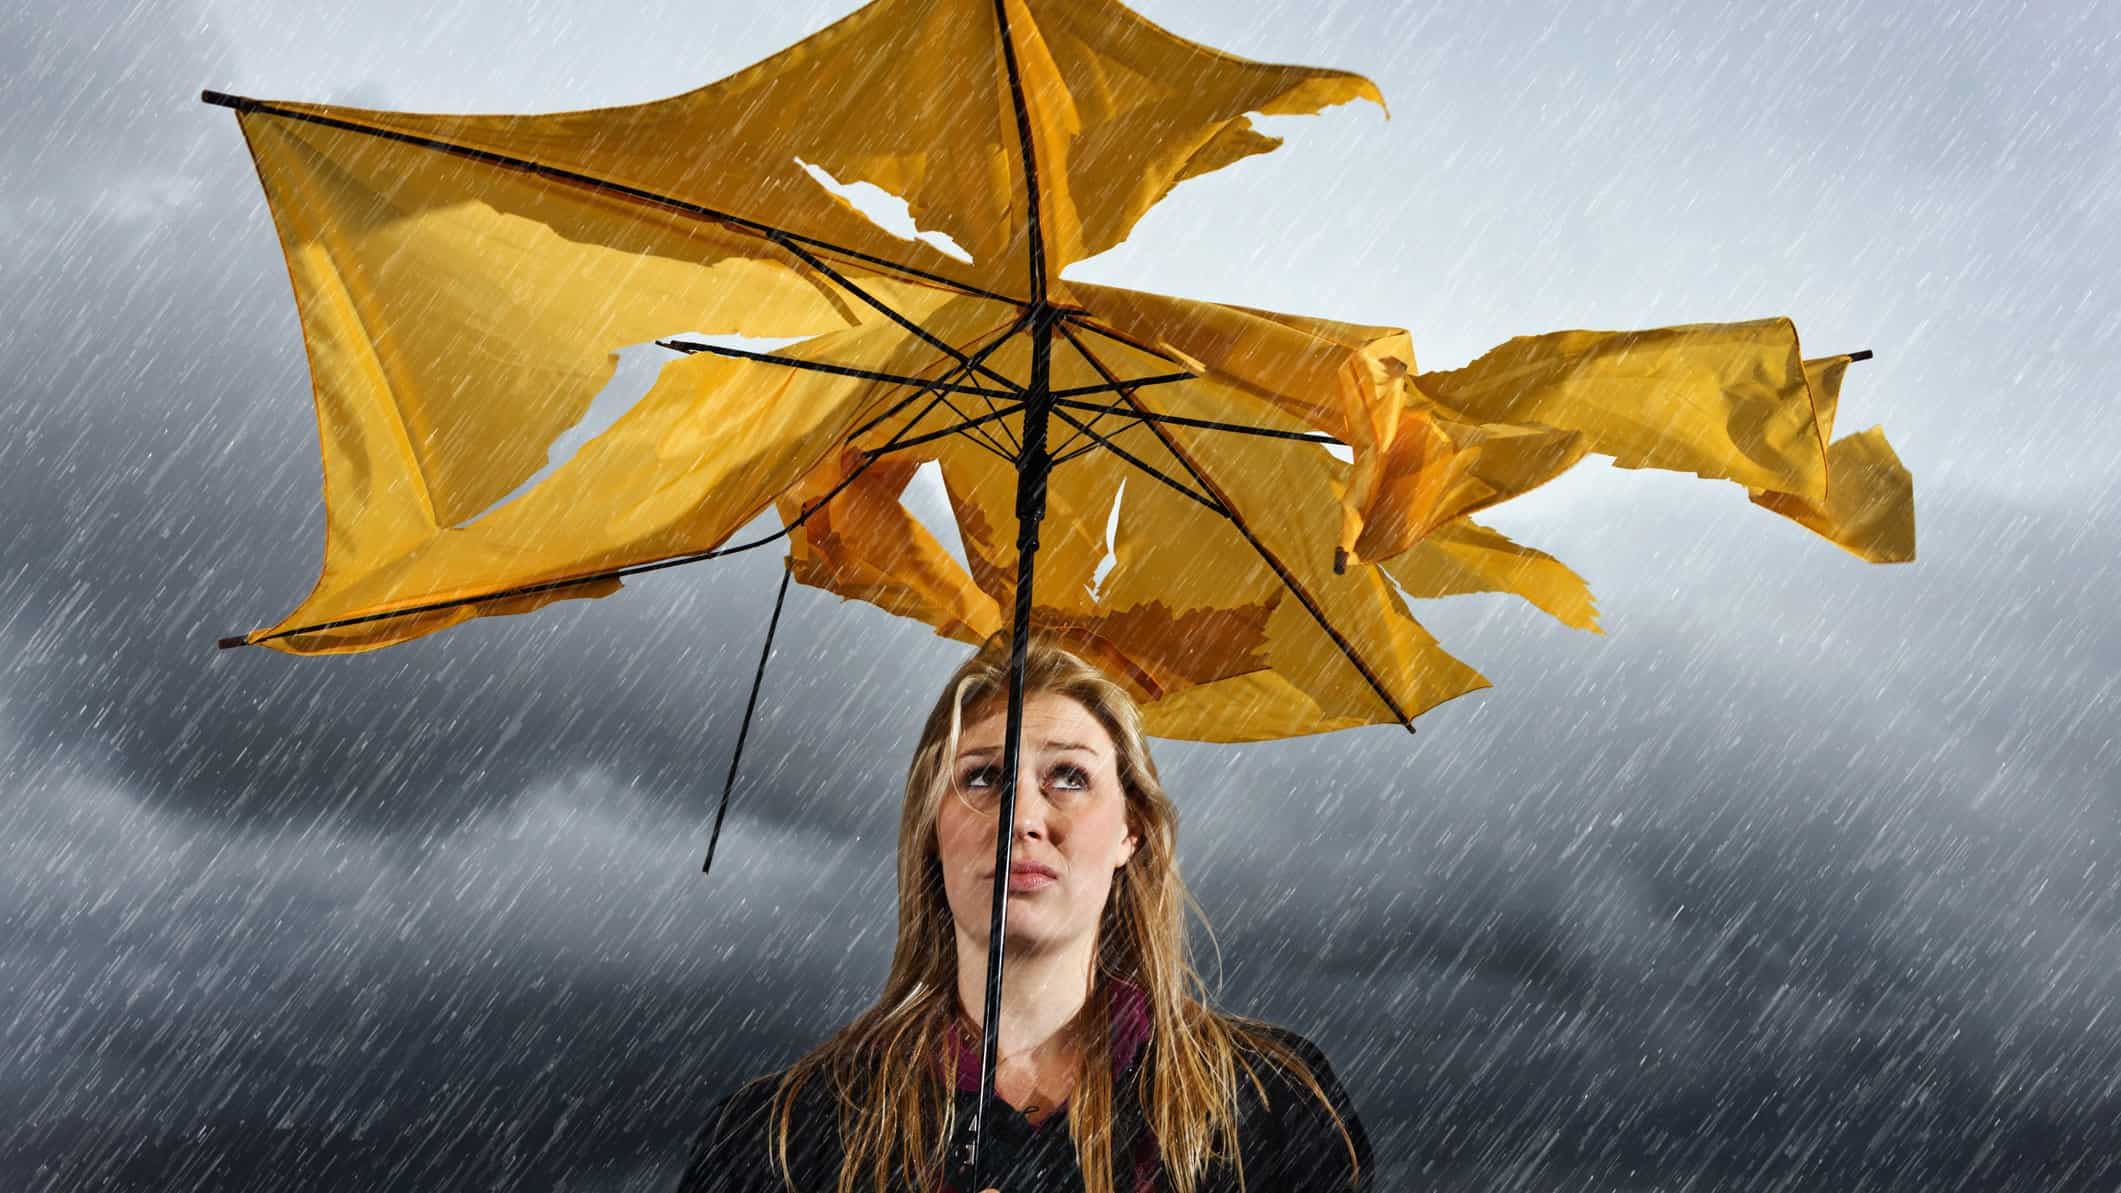 thunderstorm, rain clouds, general insurance claims, woman with broken umbrella, grey skies